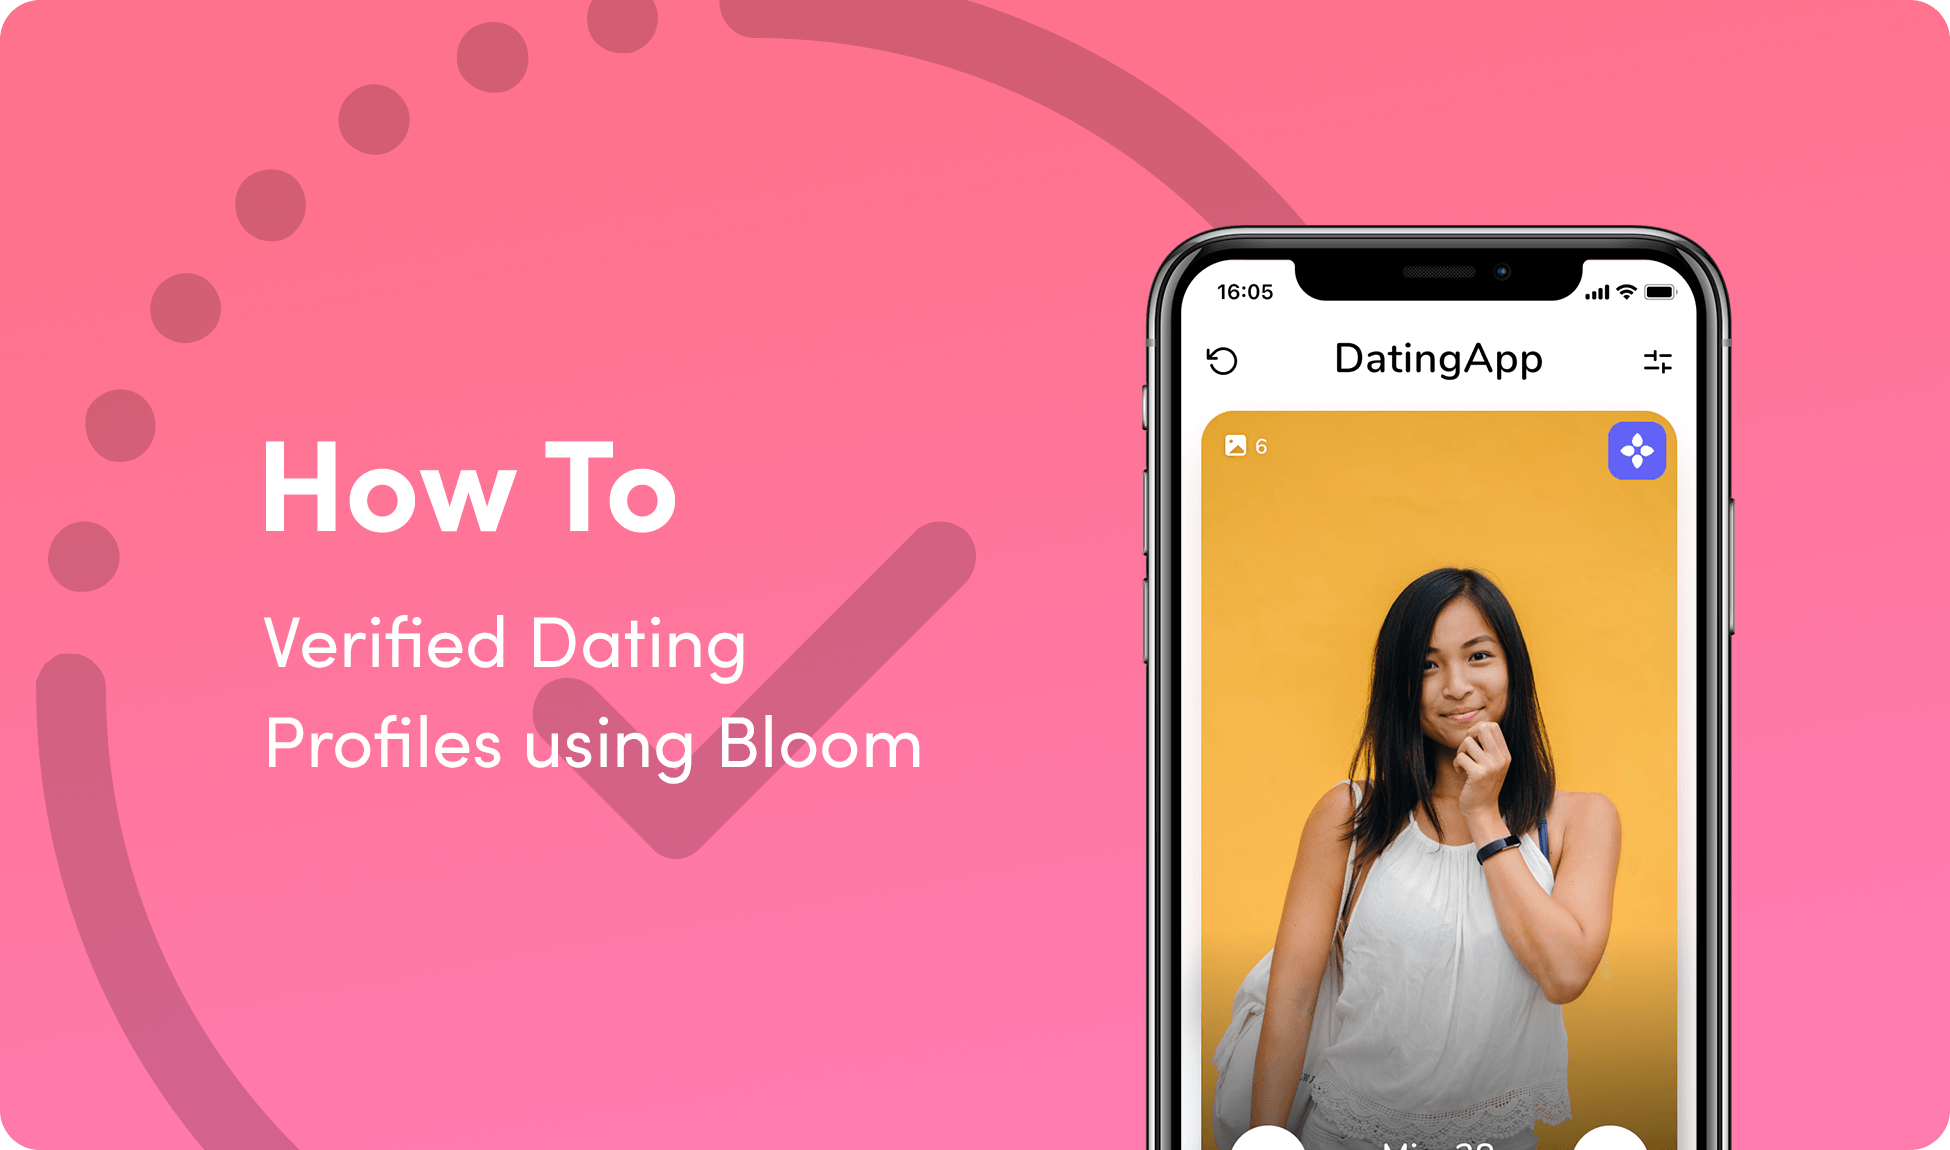 How To: Verified Dating Profiles using Bloom